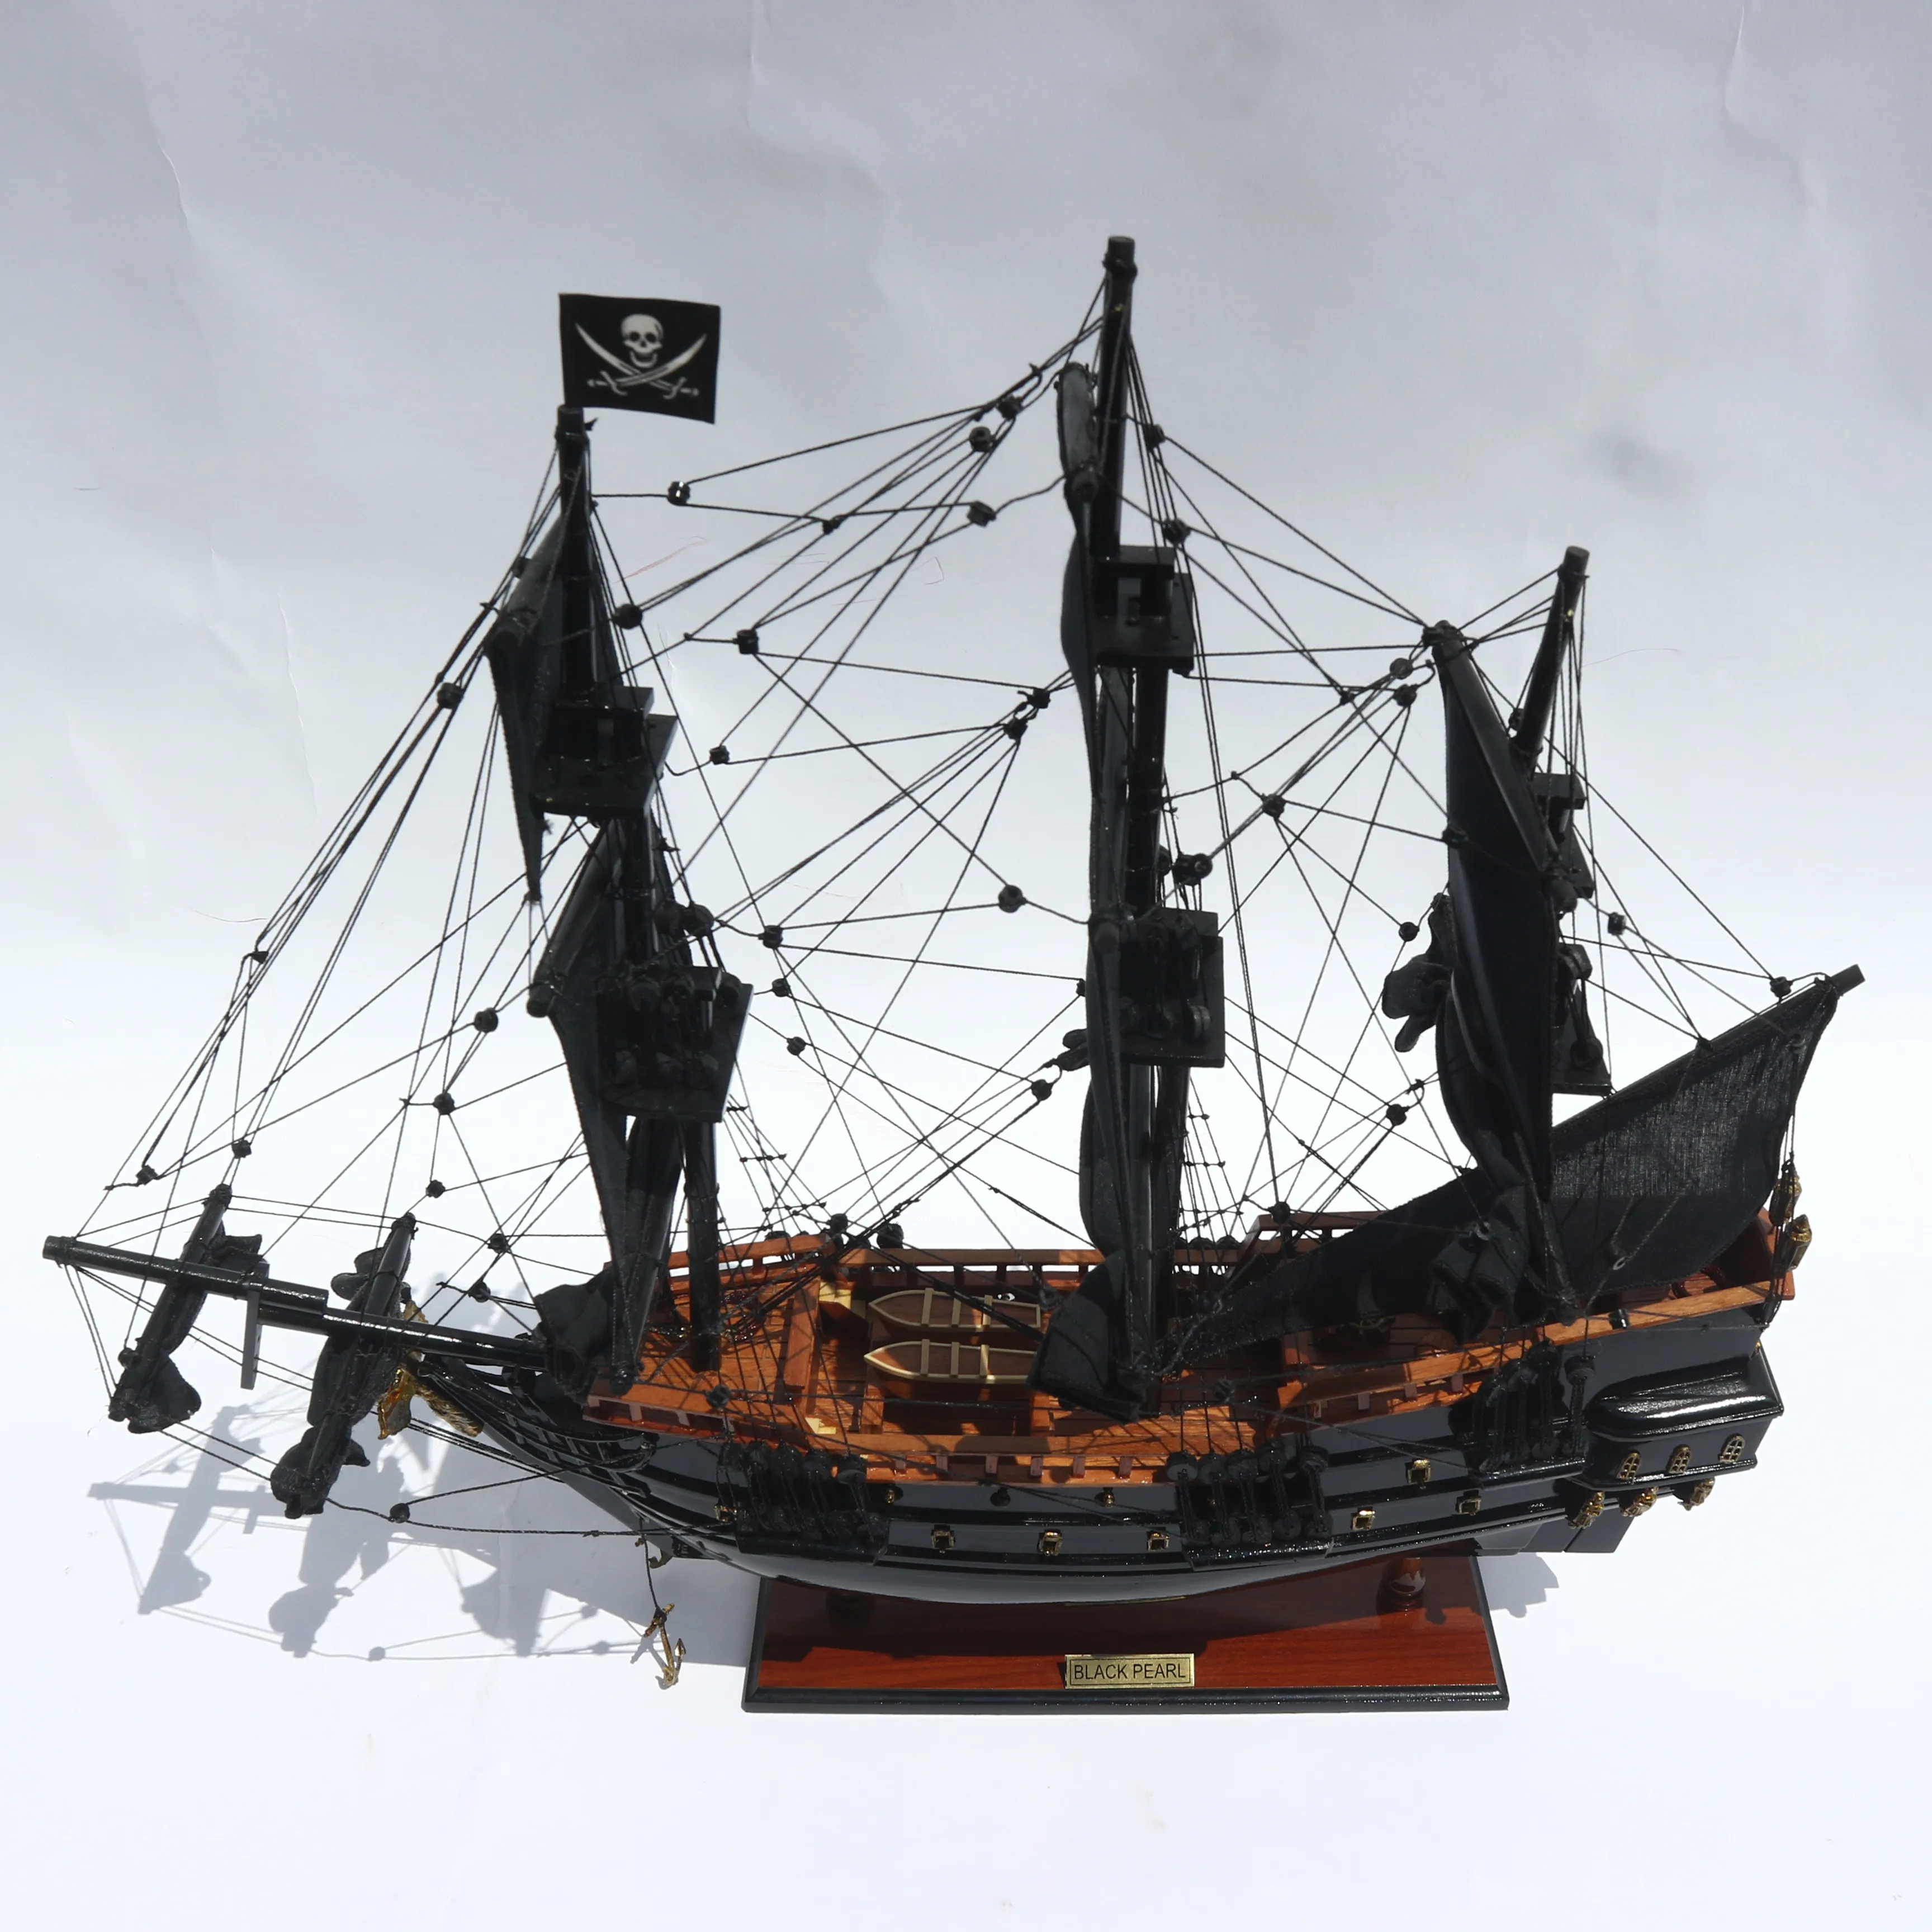 Where is the Black Pearl ship now